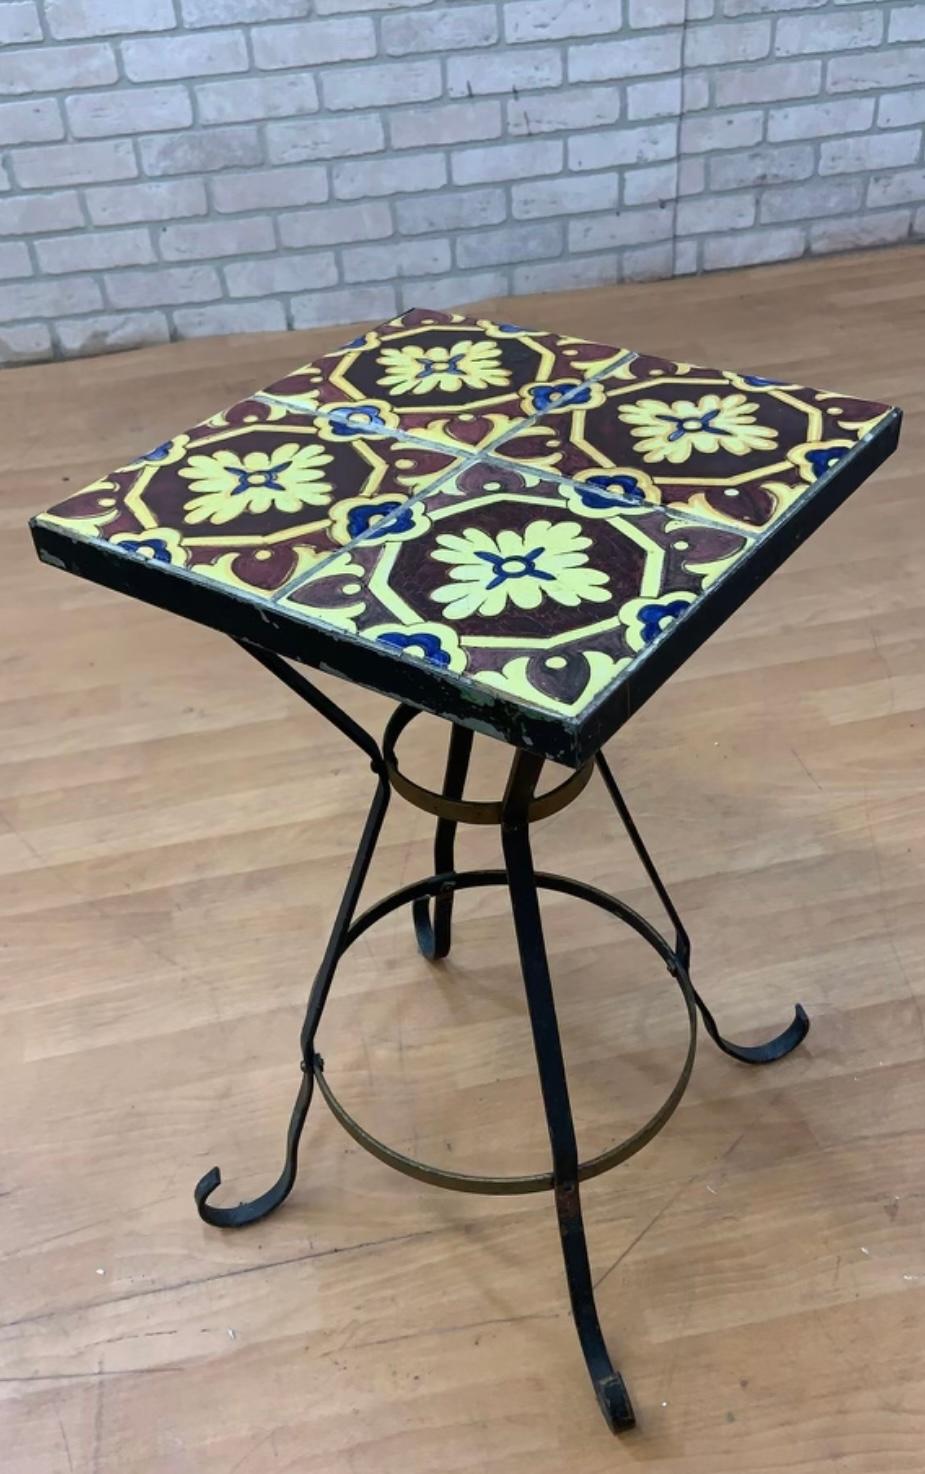 Vintage Wrought Iron Tile Top Accent Table In Good Condition For Sale In Chicago, IL